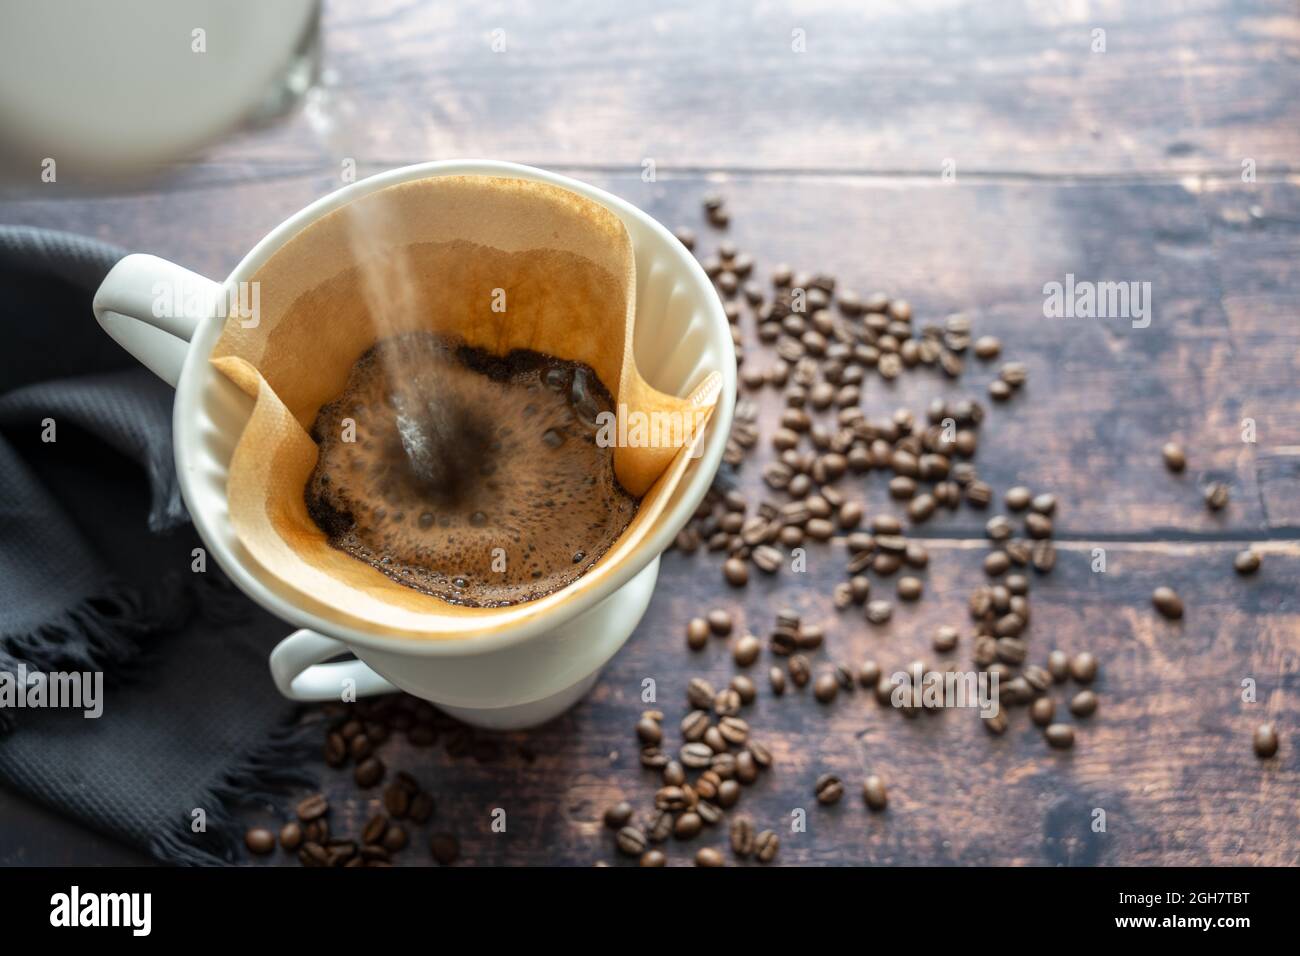 Pouring boiling water on ground coffee in a paper filter and a porcelain holder on a mug for an aromatic brewed hot drink, rustic wooden table with so Stock Photo